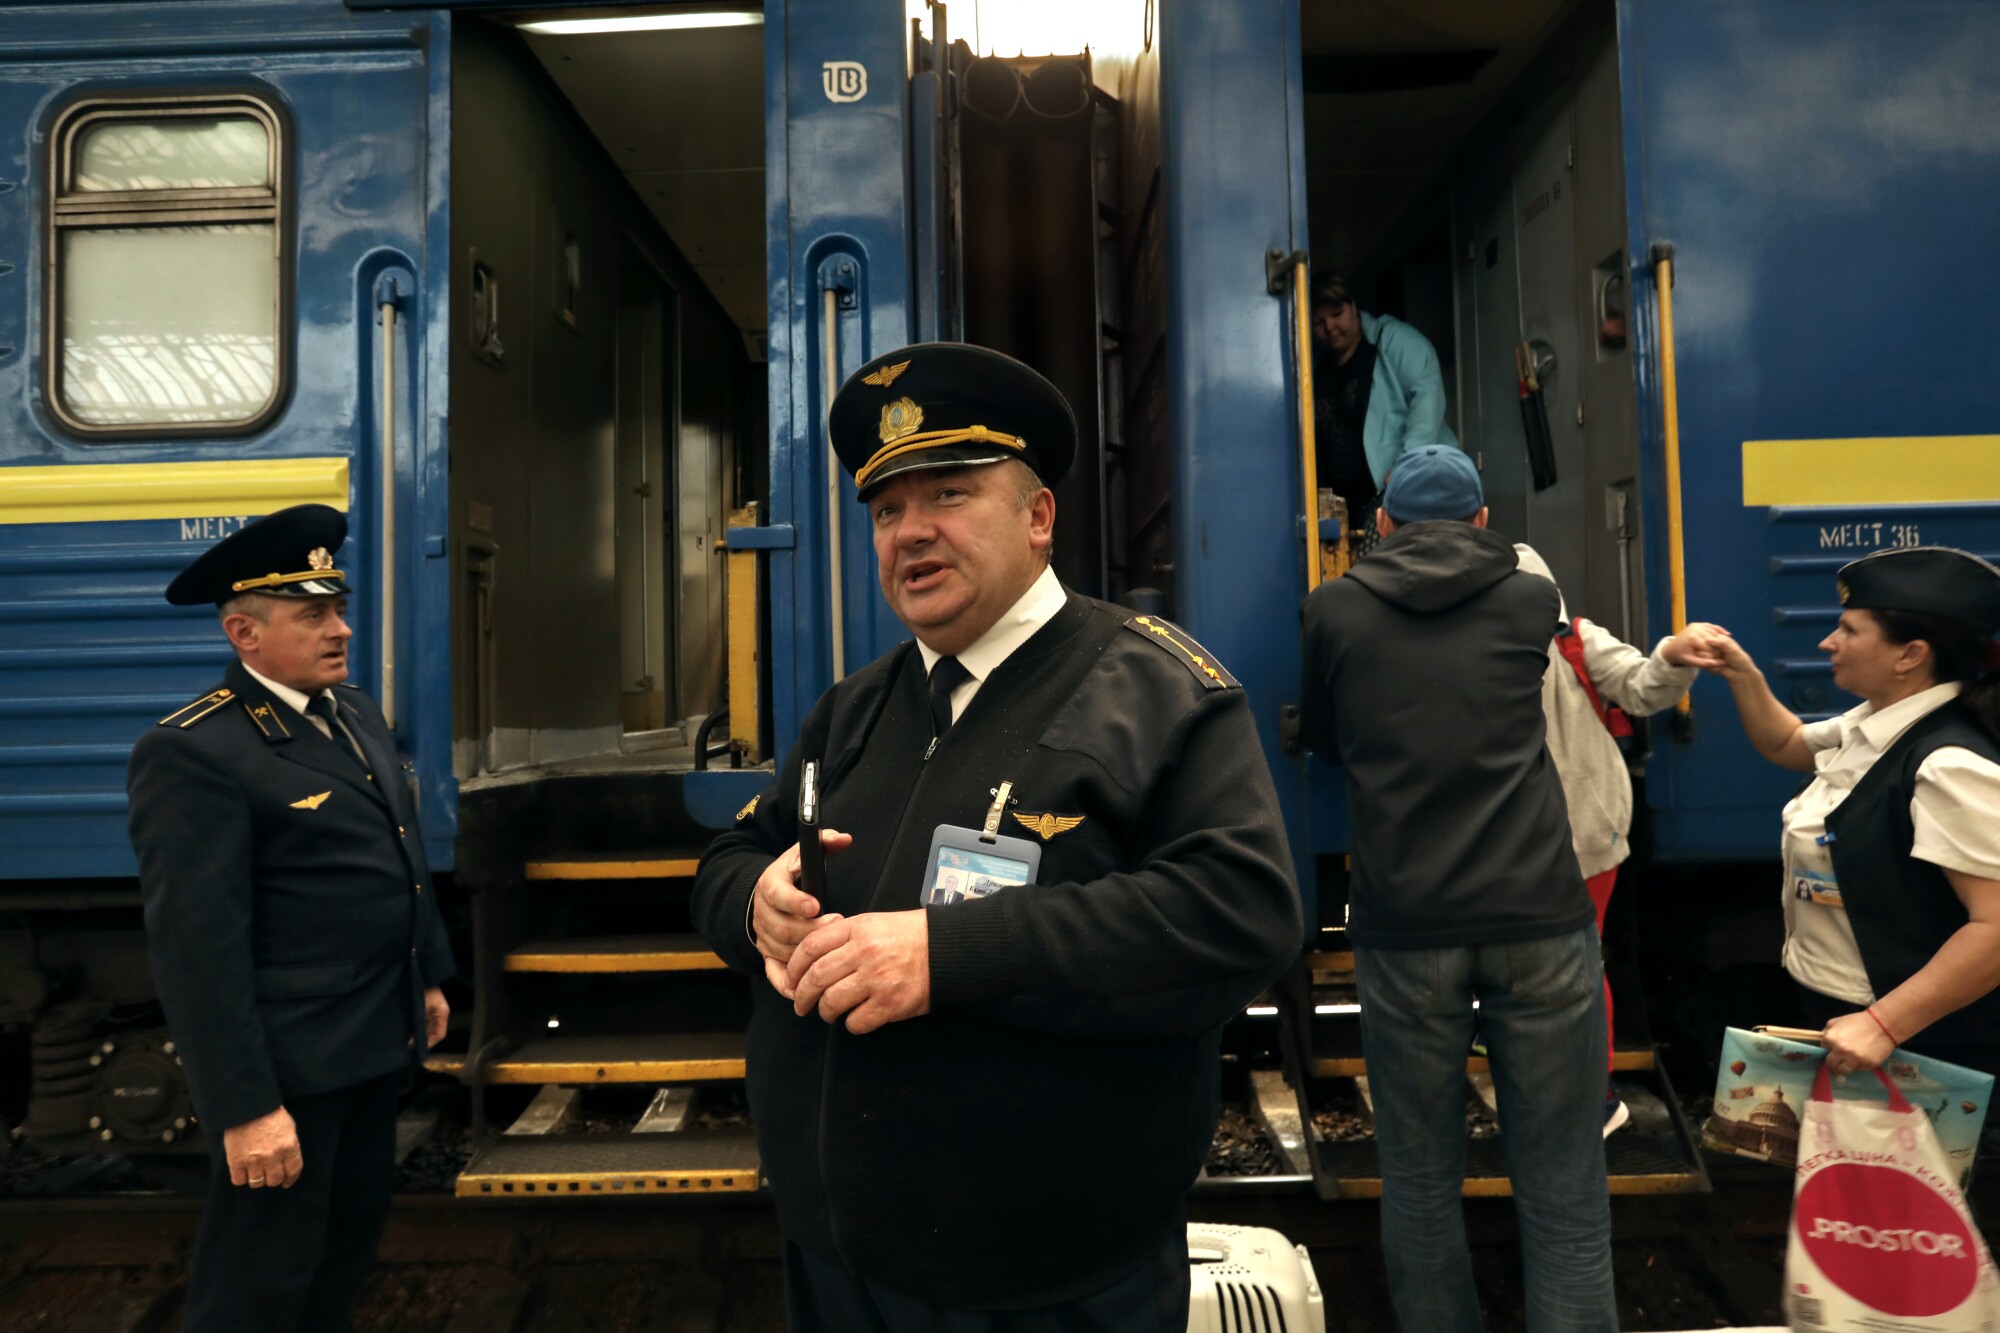 Two men in uniform and hat flank a set of steps on a blue train car